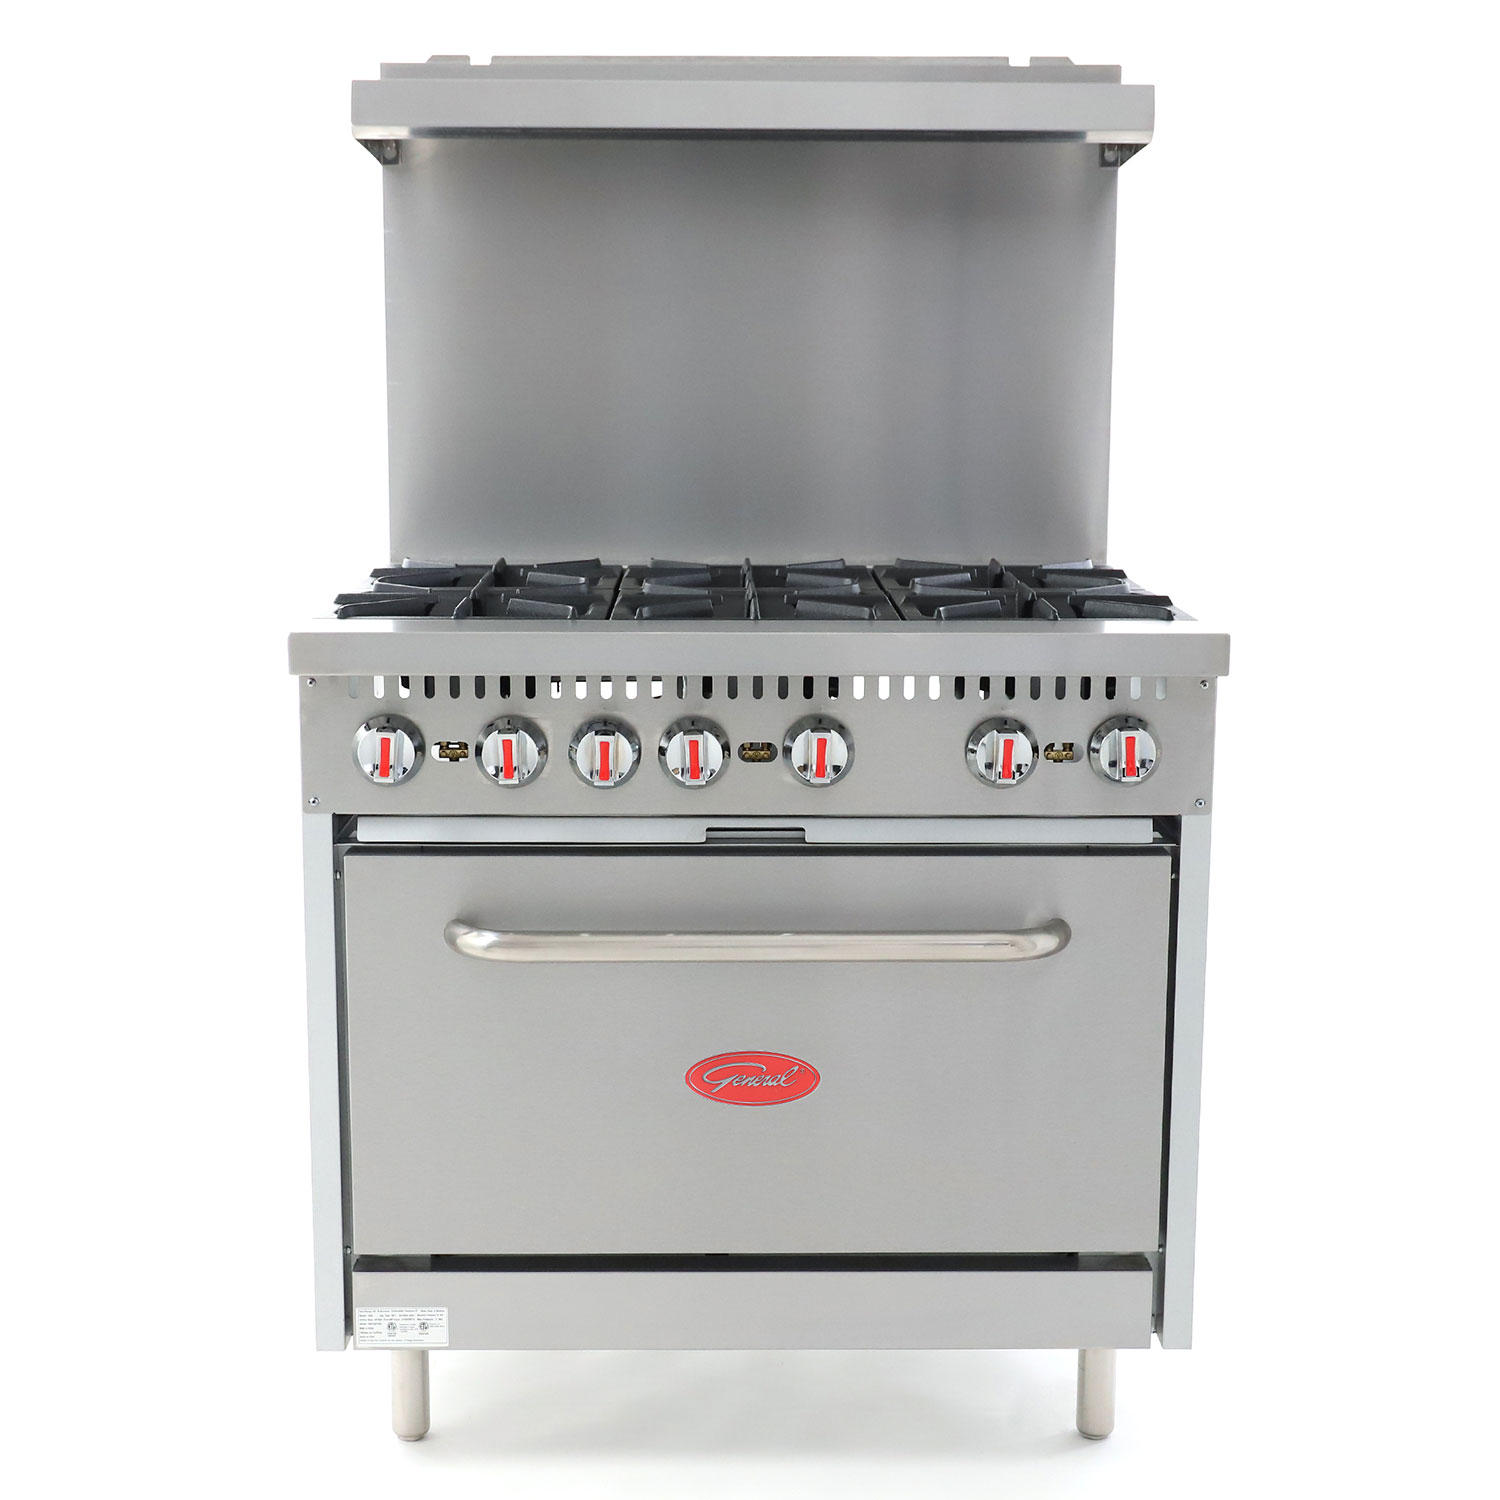 General Stainless Steel Gas Range (Choose Size & Gas Type) - 36', Liquid Propane, Liftgate